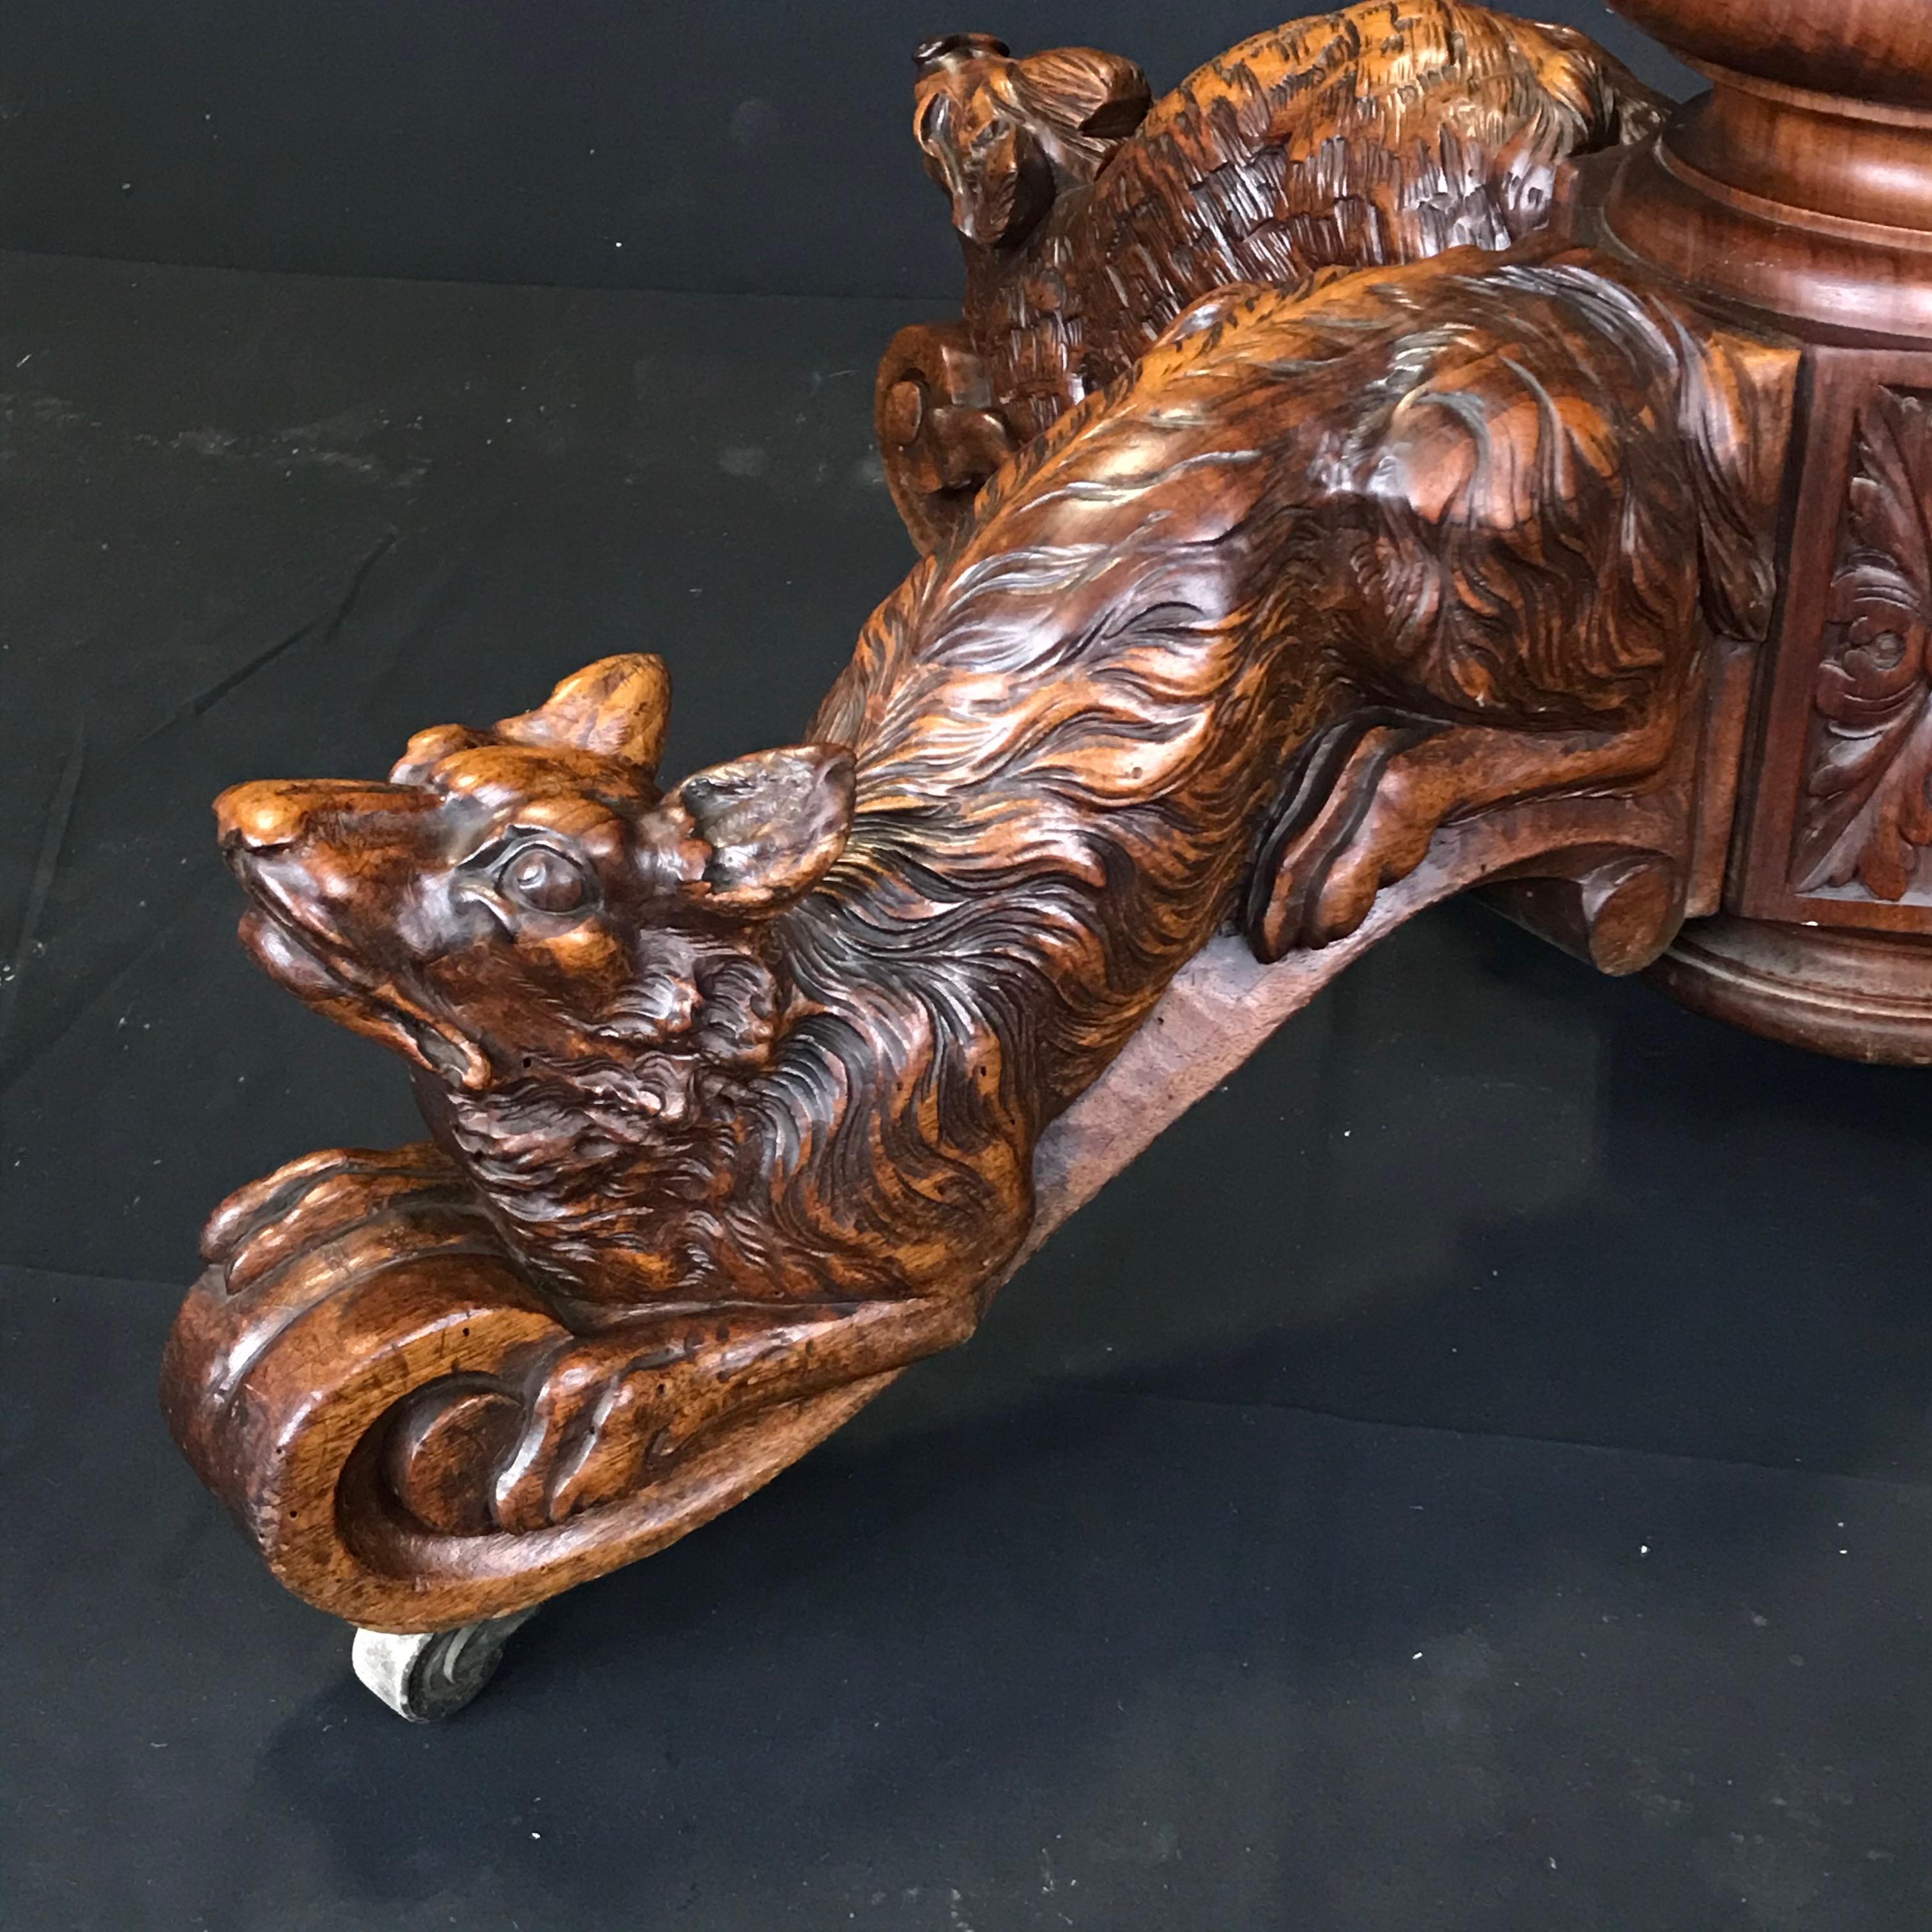 A strikingly beautiful French antique walnut hunting table having intricately detailed figures of a hunting retriever dog, boar, fox and deer on its single pedestal base. Typical of the Renaissance Revival style produced in France in the 19th